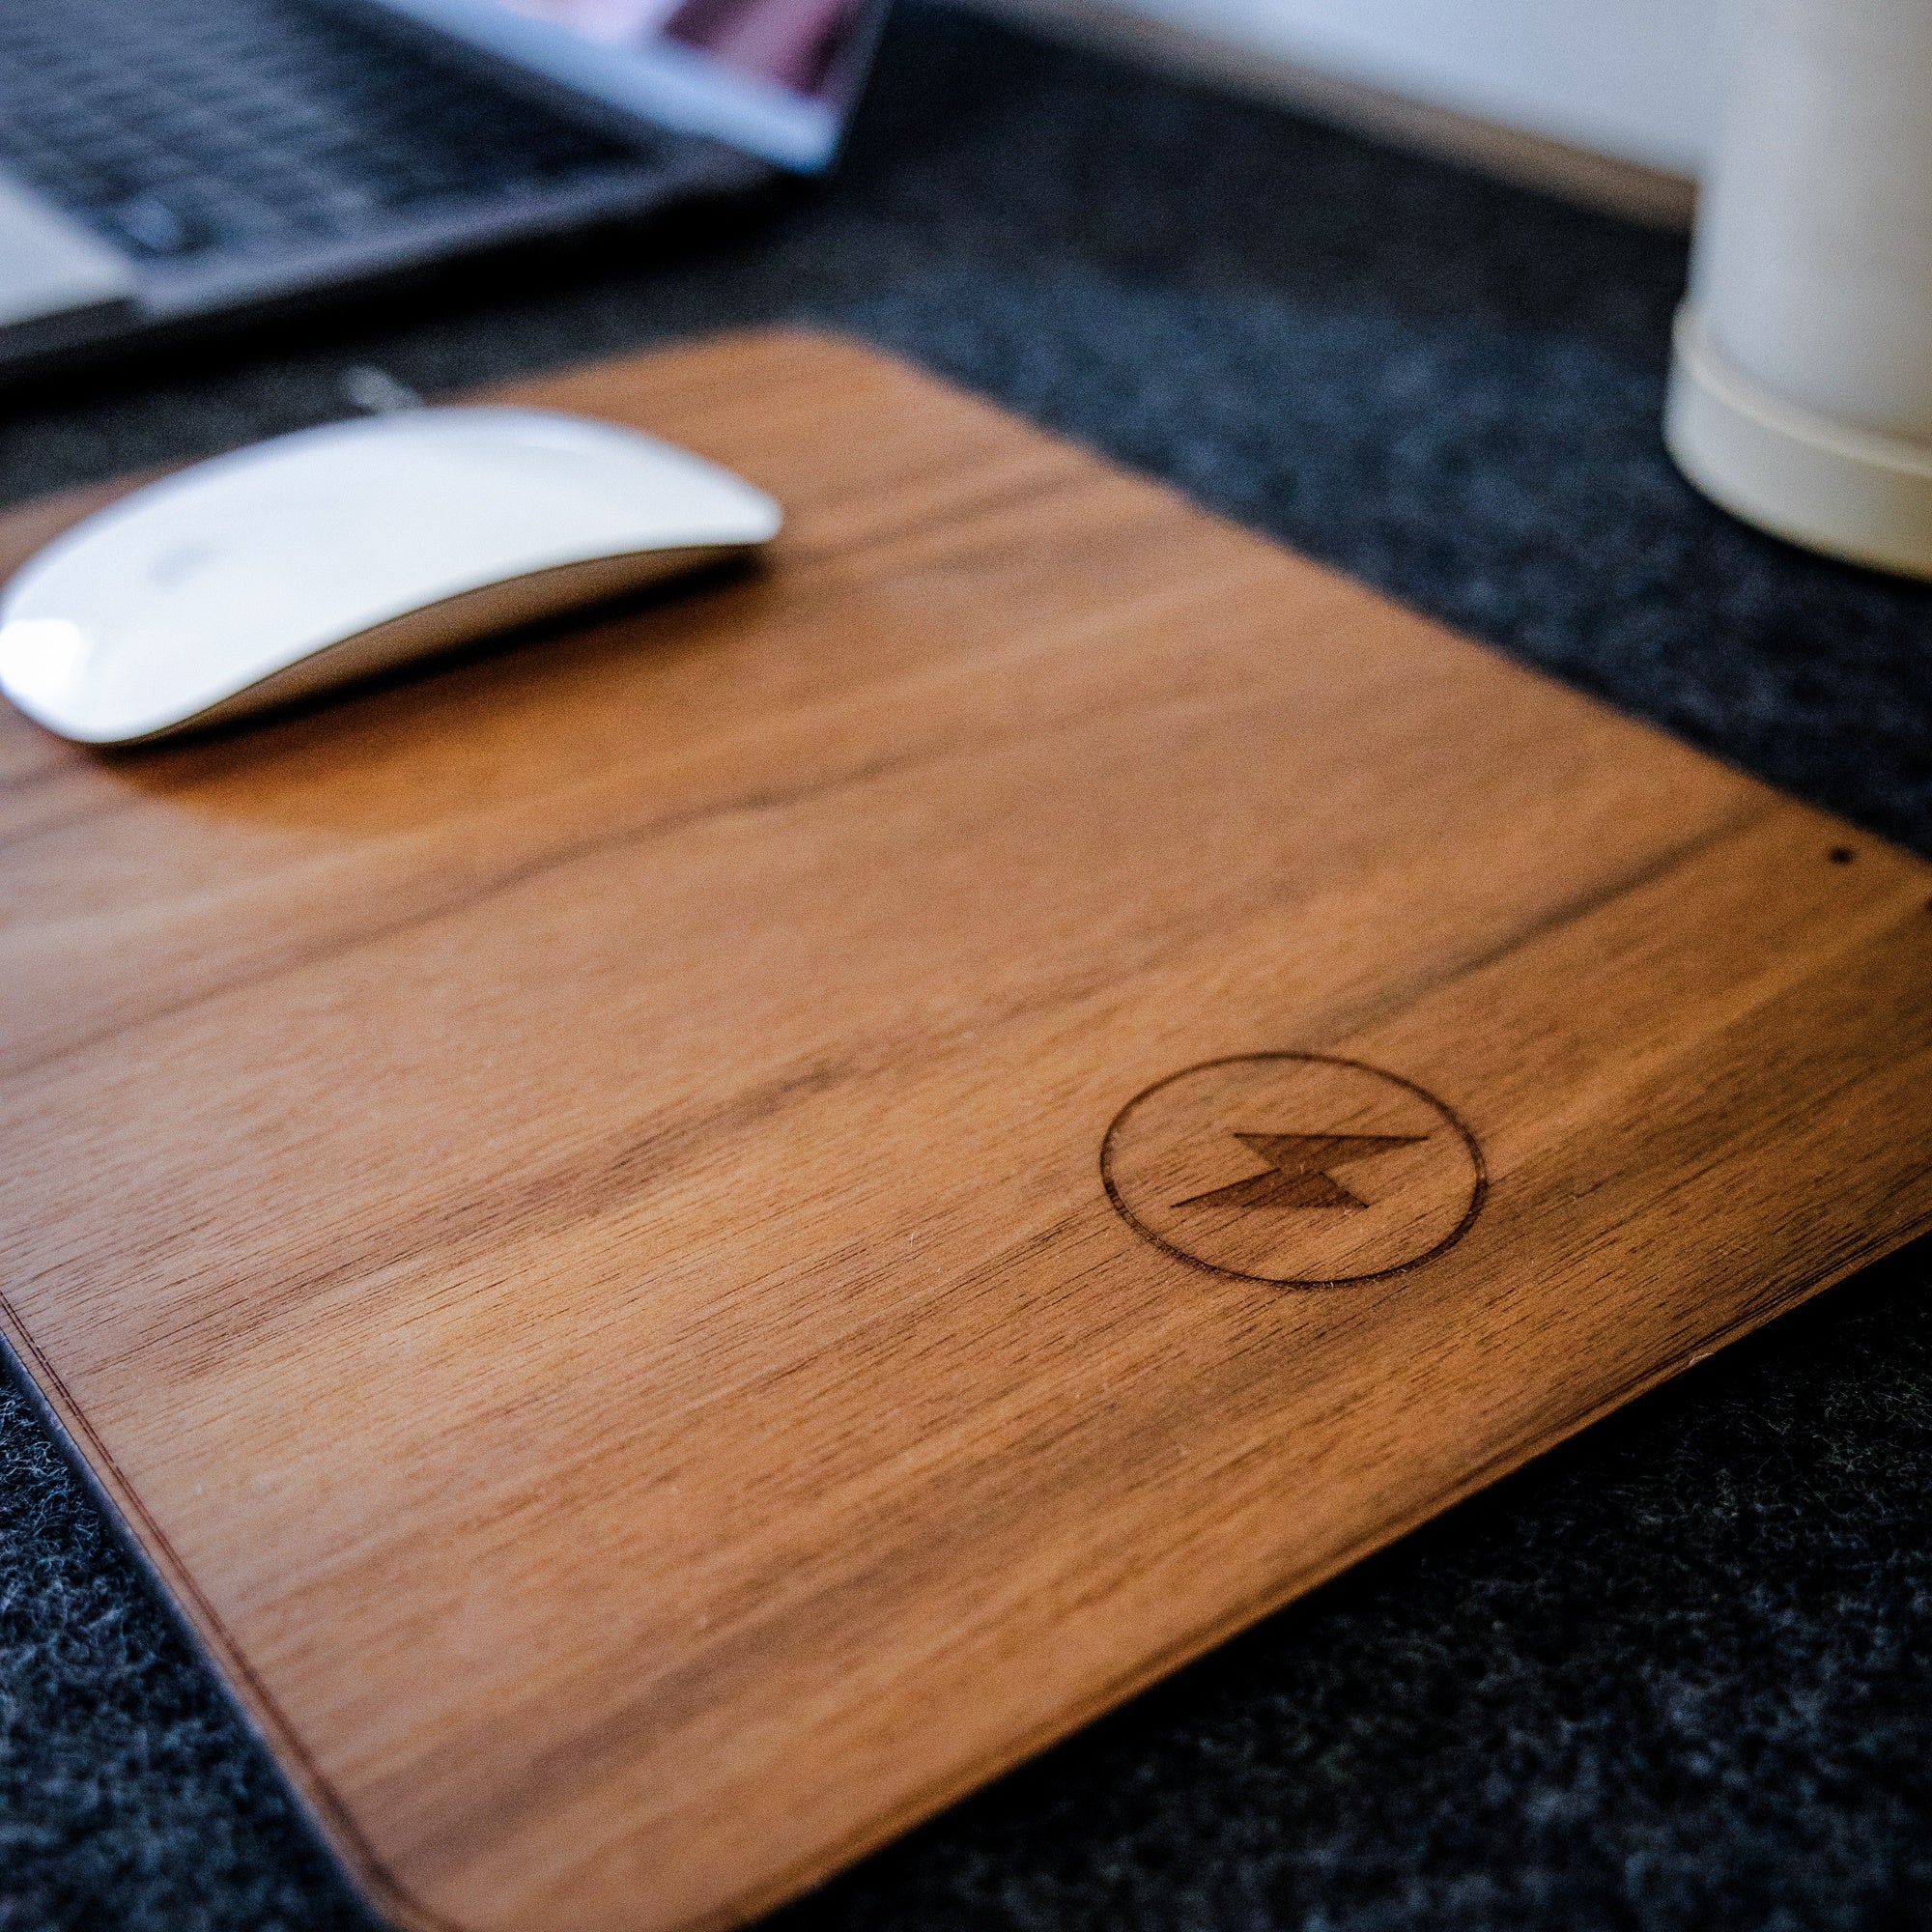 Oversize Wood Mousepad with 15 watt Wireless Fast Charger